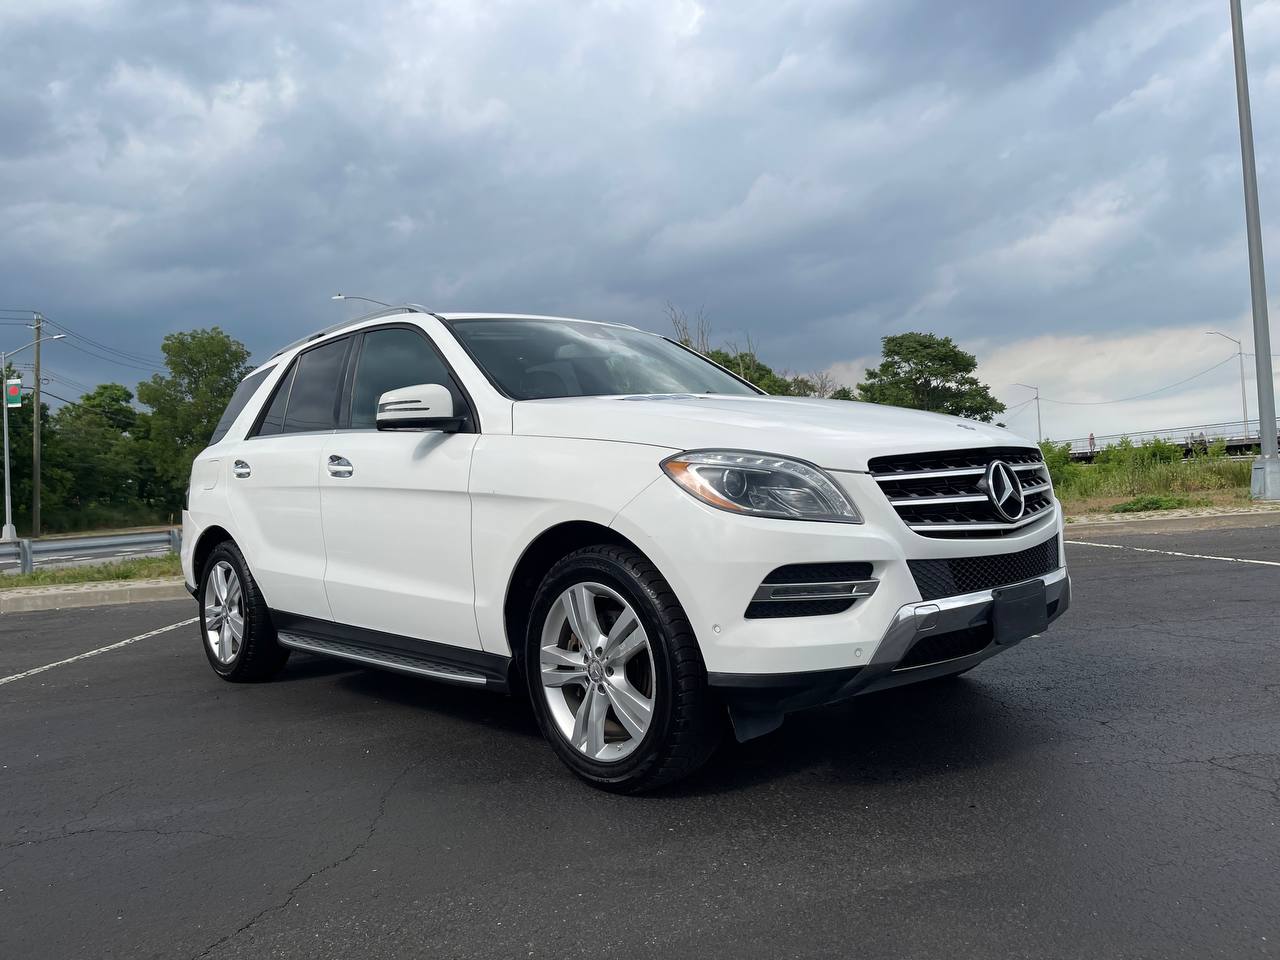 Used - Mercedes-Benz ML 350 4MATIC AWD SUV for sale in Staten Island NY